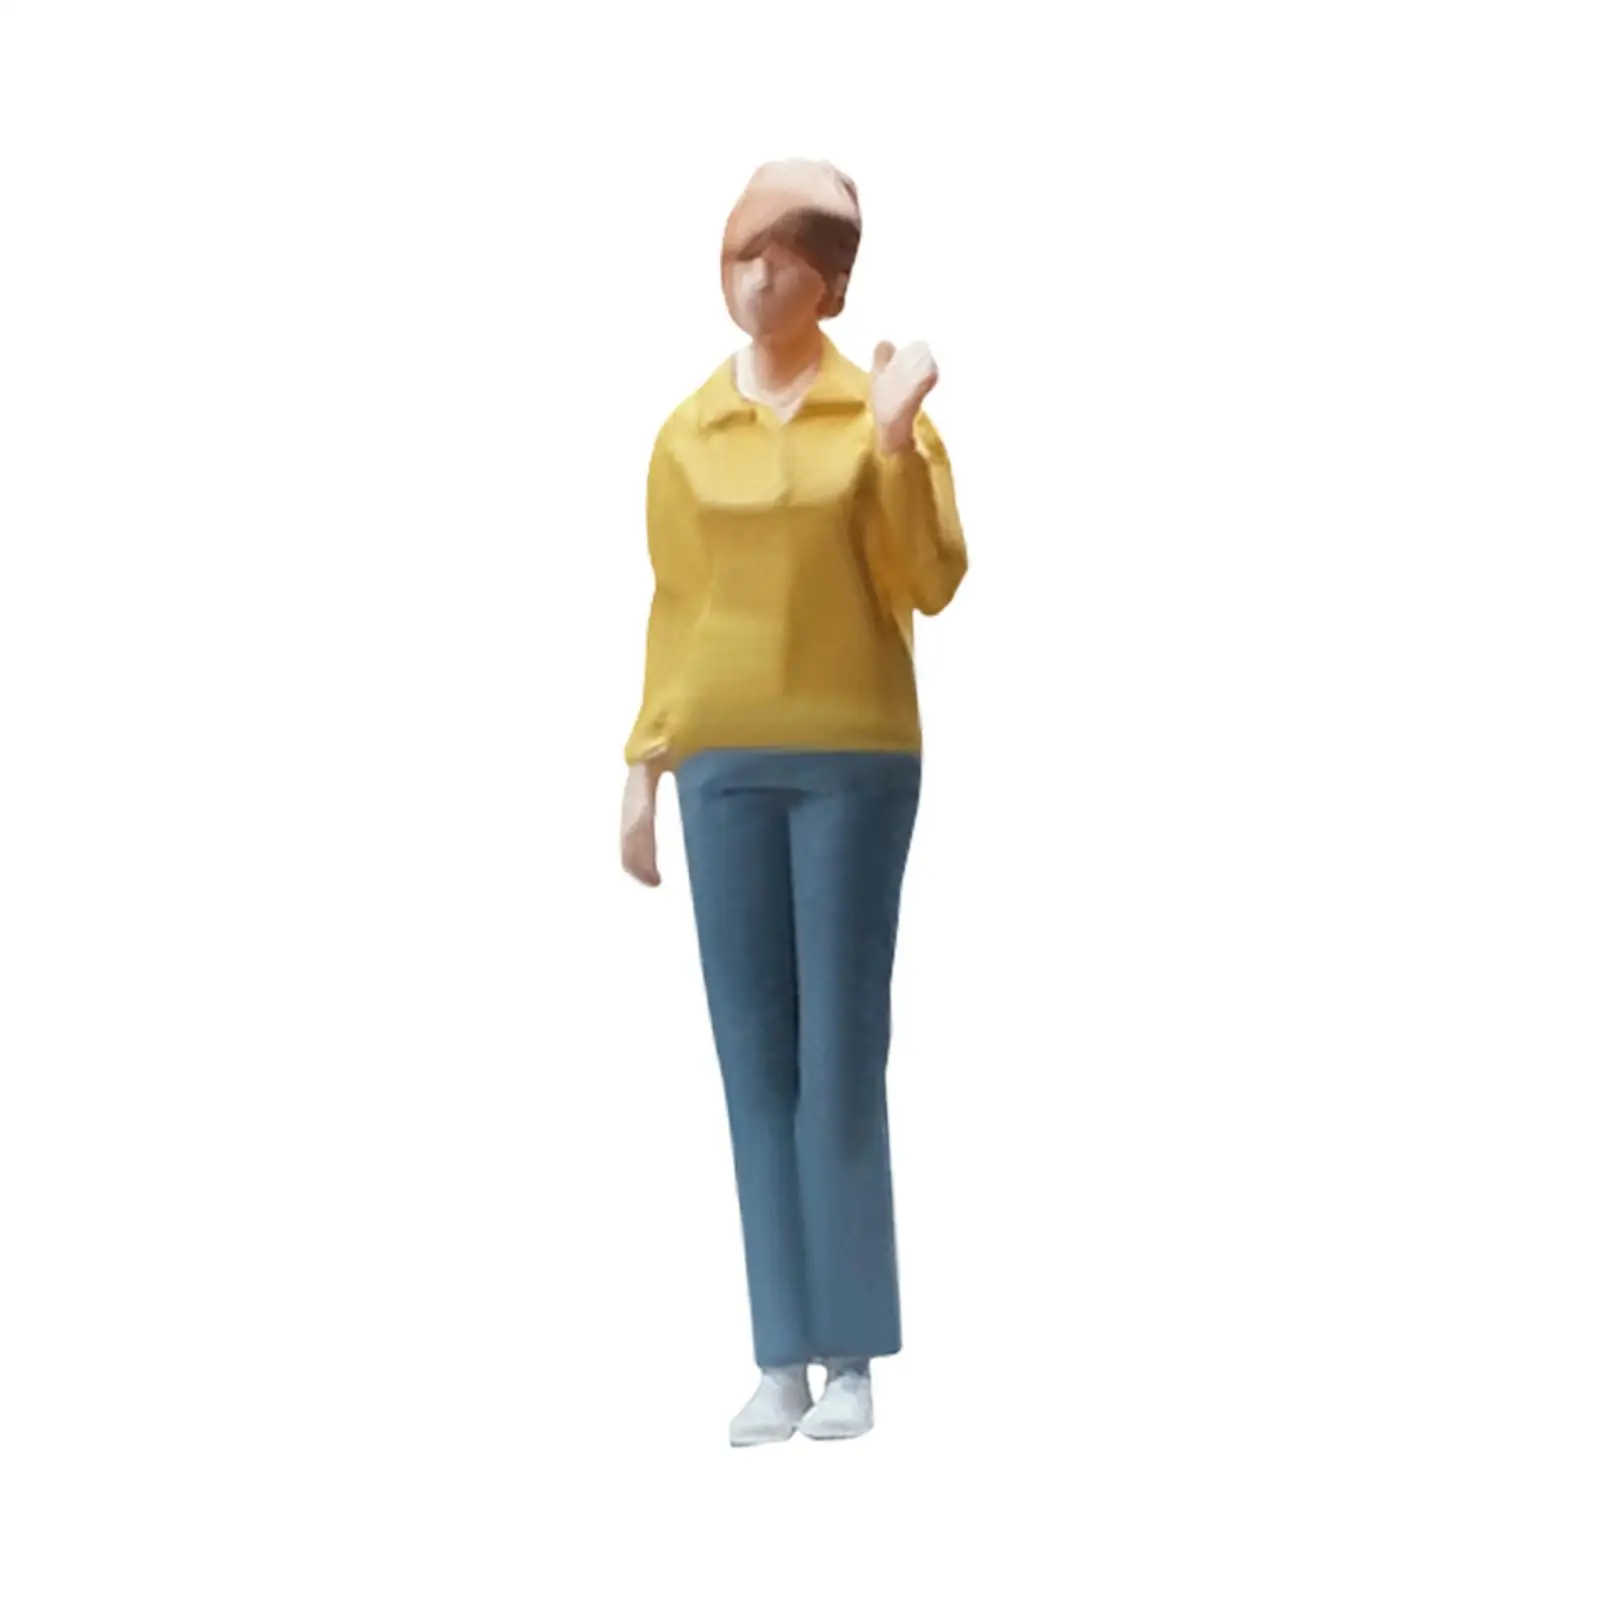 Simulated Girl Figures 1/64 HO Scale Realistic Character Model Painted Figures for Model Train Layout Miniature Scene Diorama